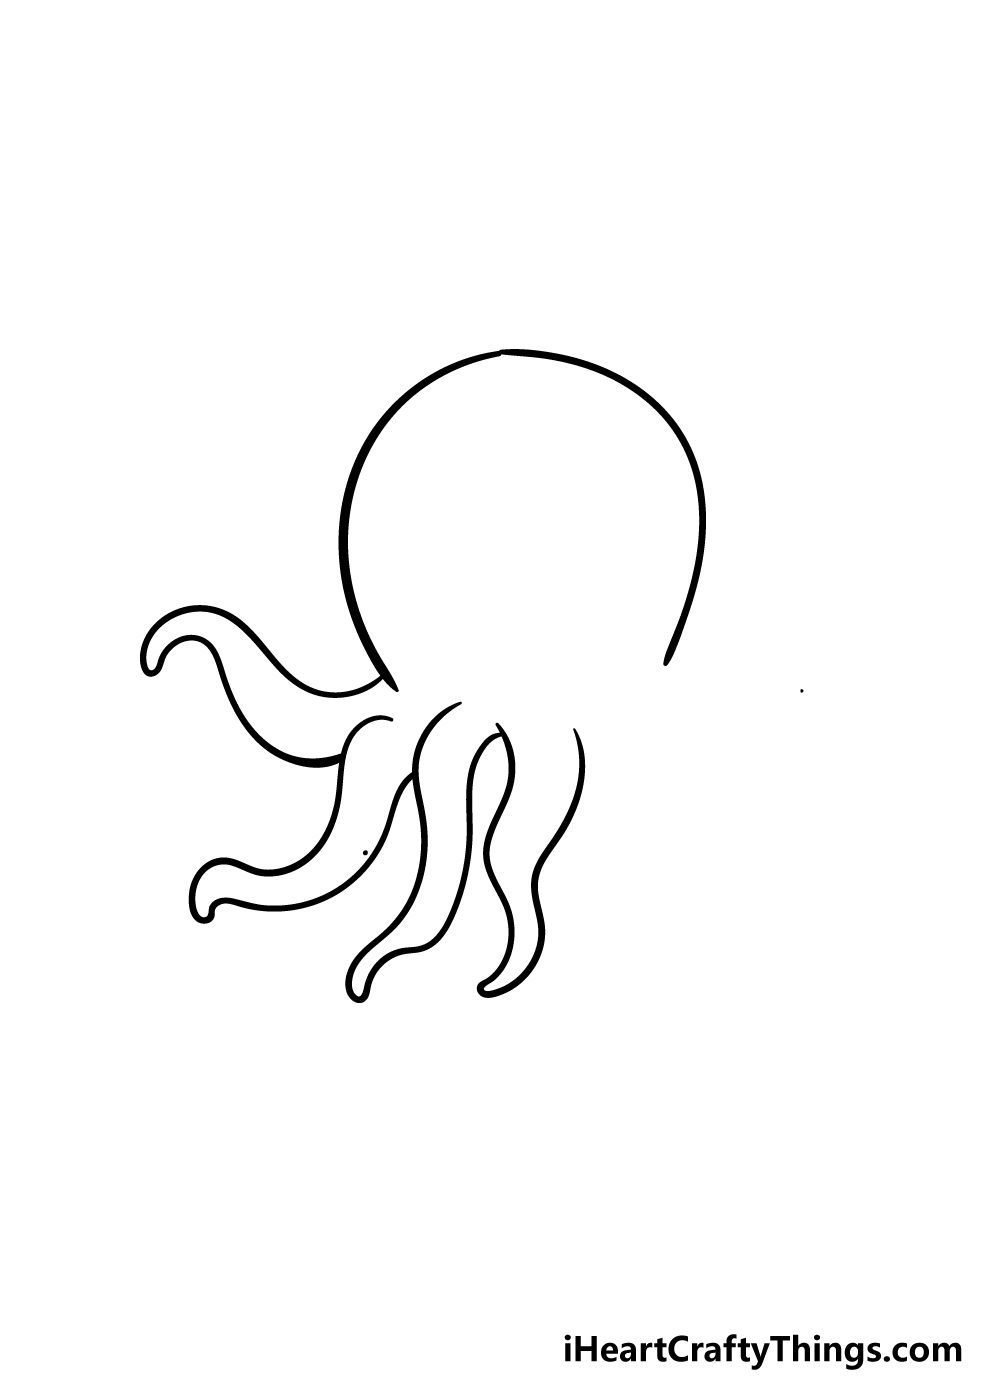 octopus drawing step 3